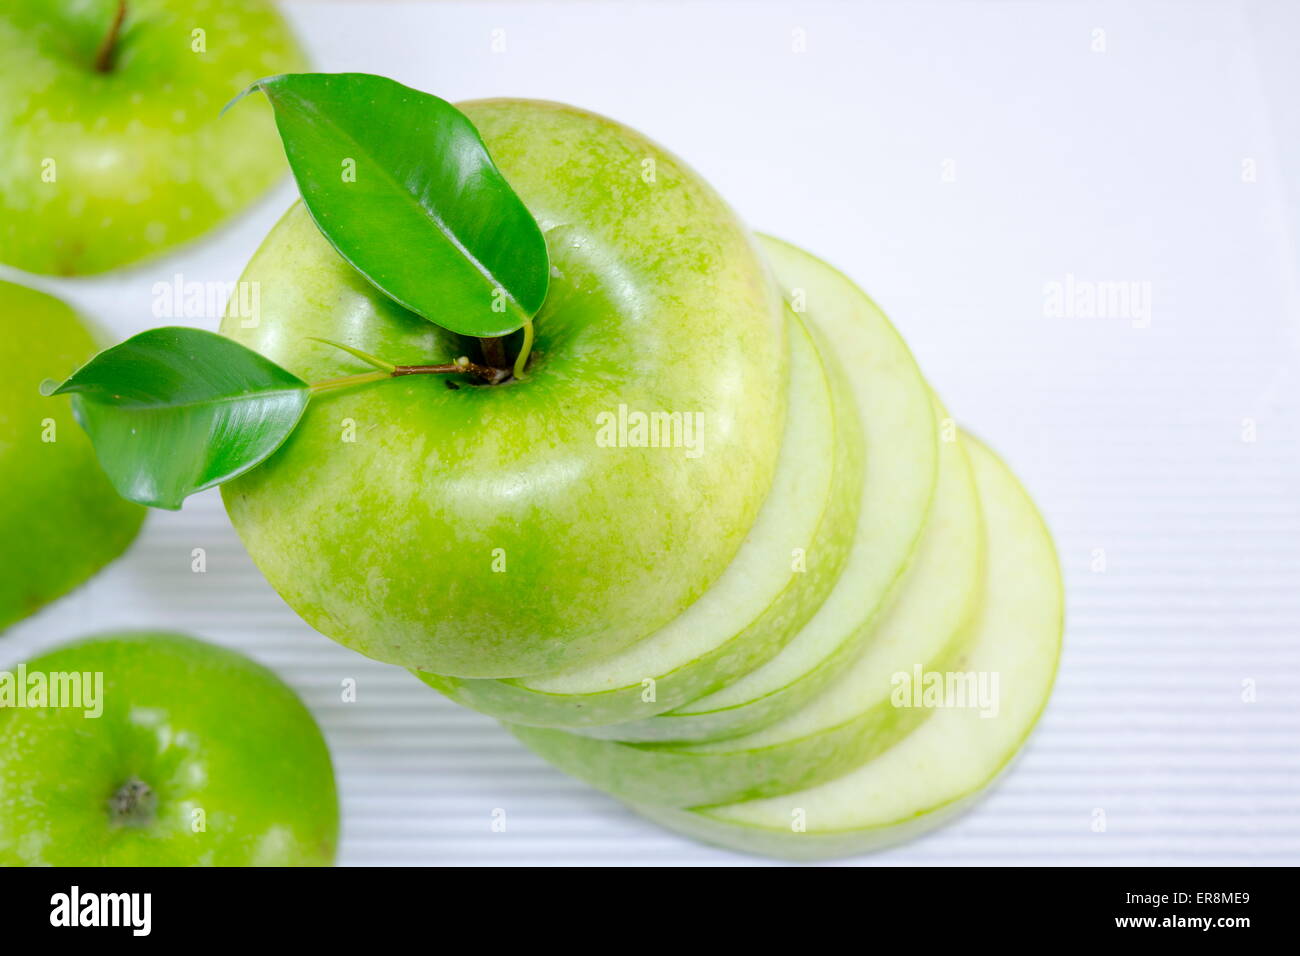 Apple sliced in thin pieces on white Stock Photo